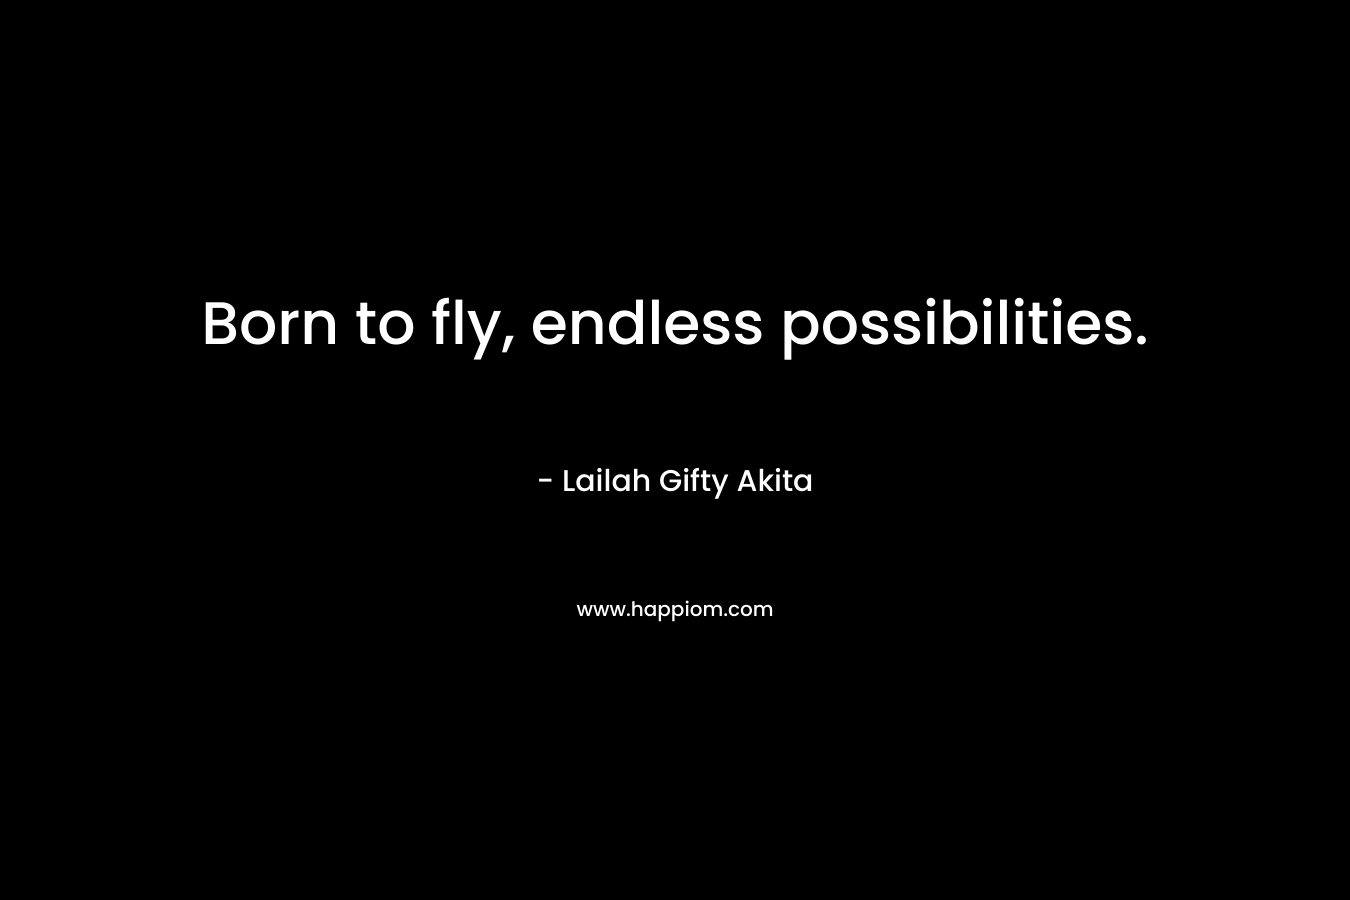 Born to fly, endless possibilities.